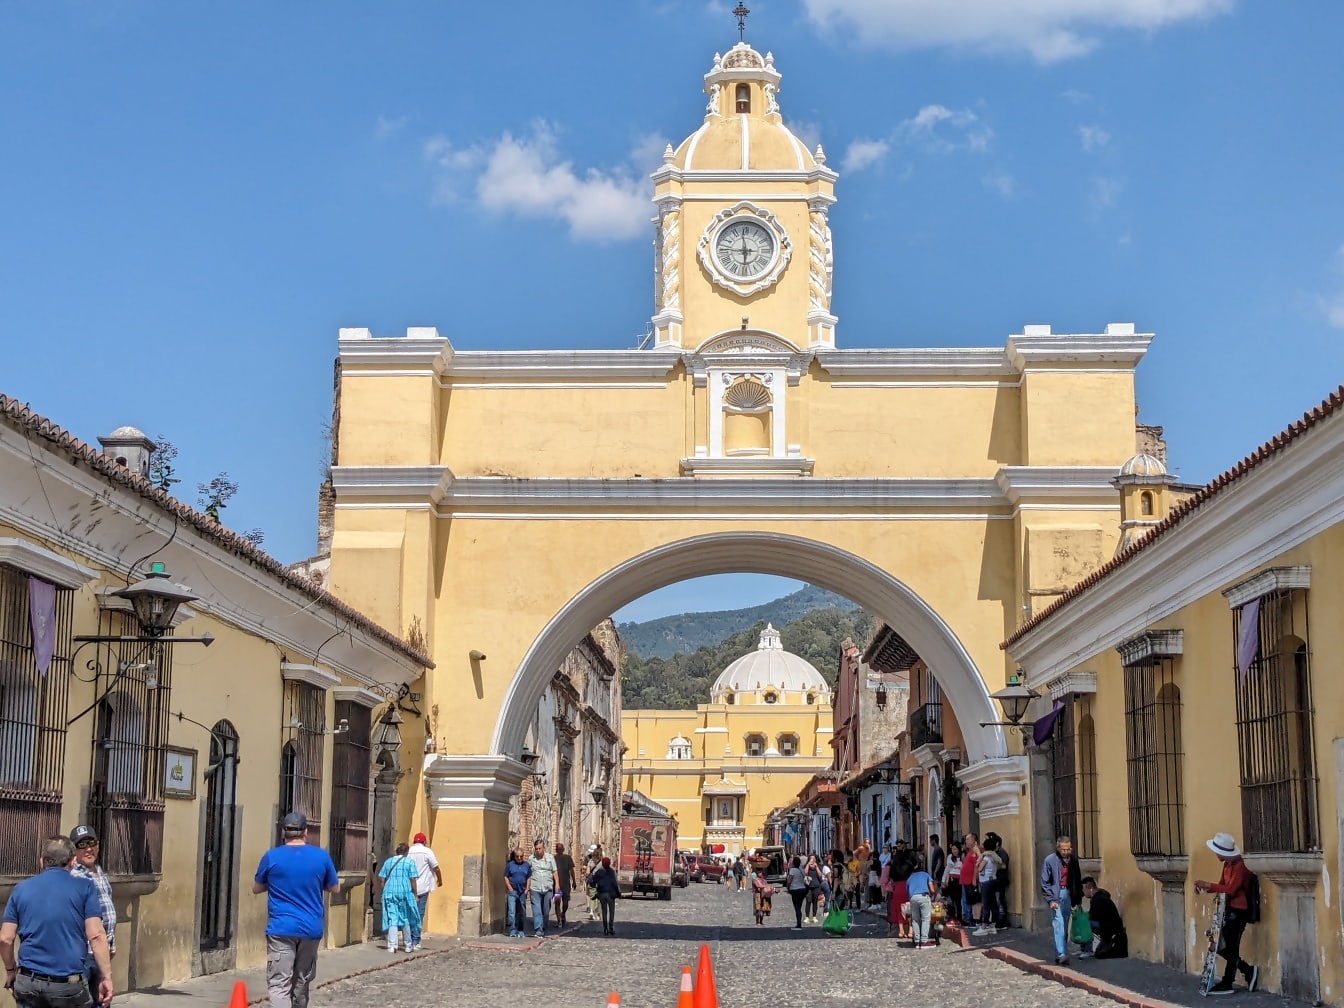 Santa Catalina Arch with a clock tower above road and people walking in the street